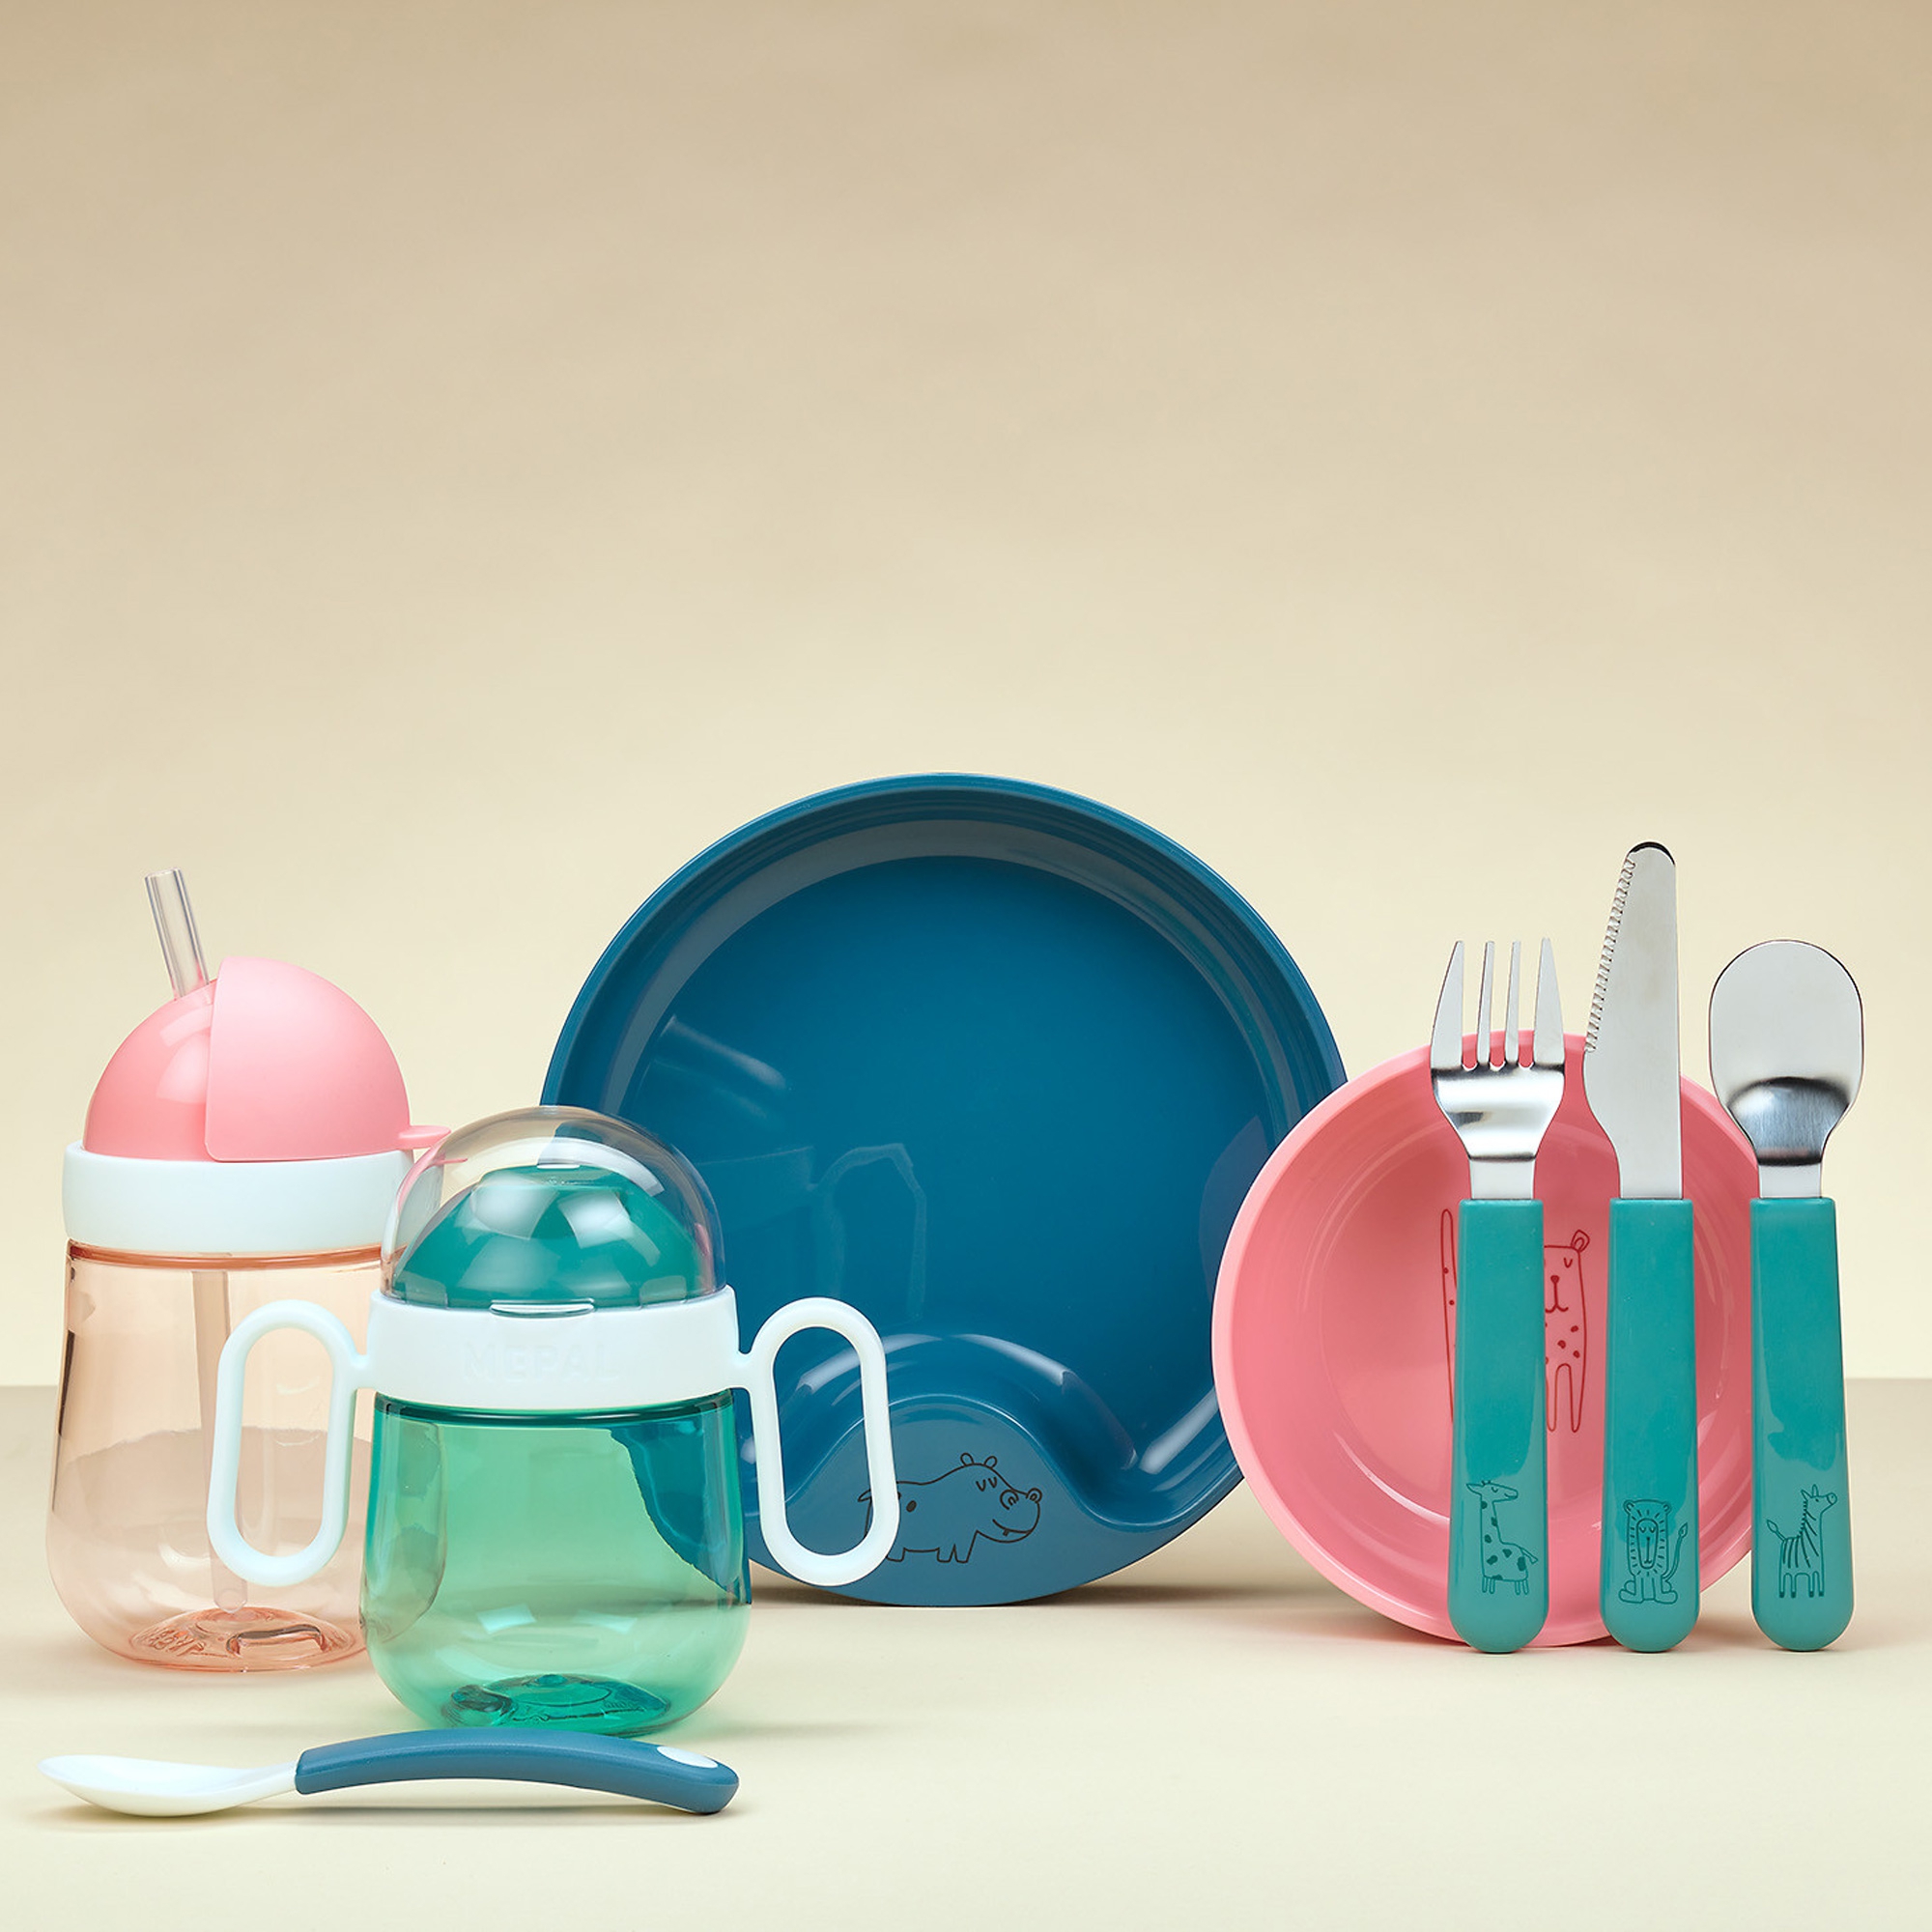 Mepal - Mio children's cutlery set 3 pieces - different colors and motifs